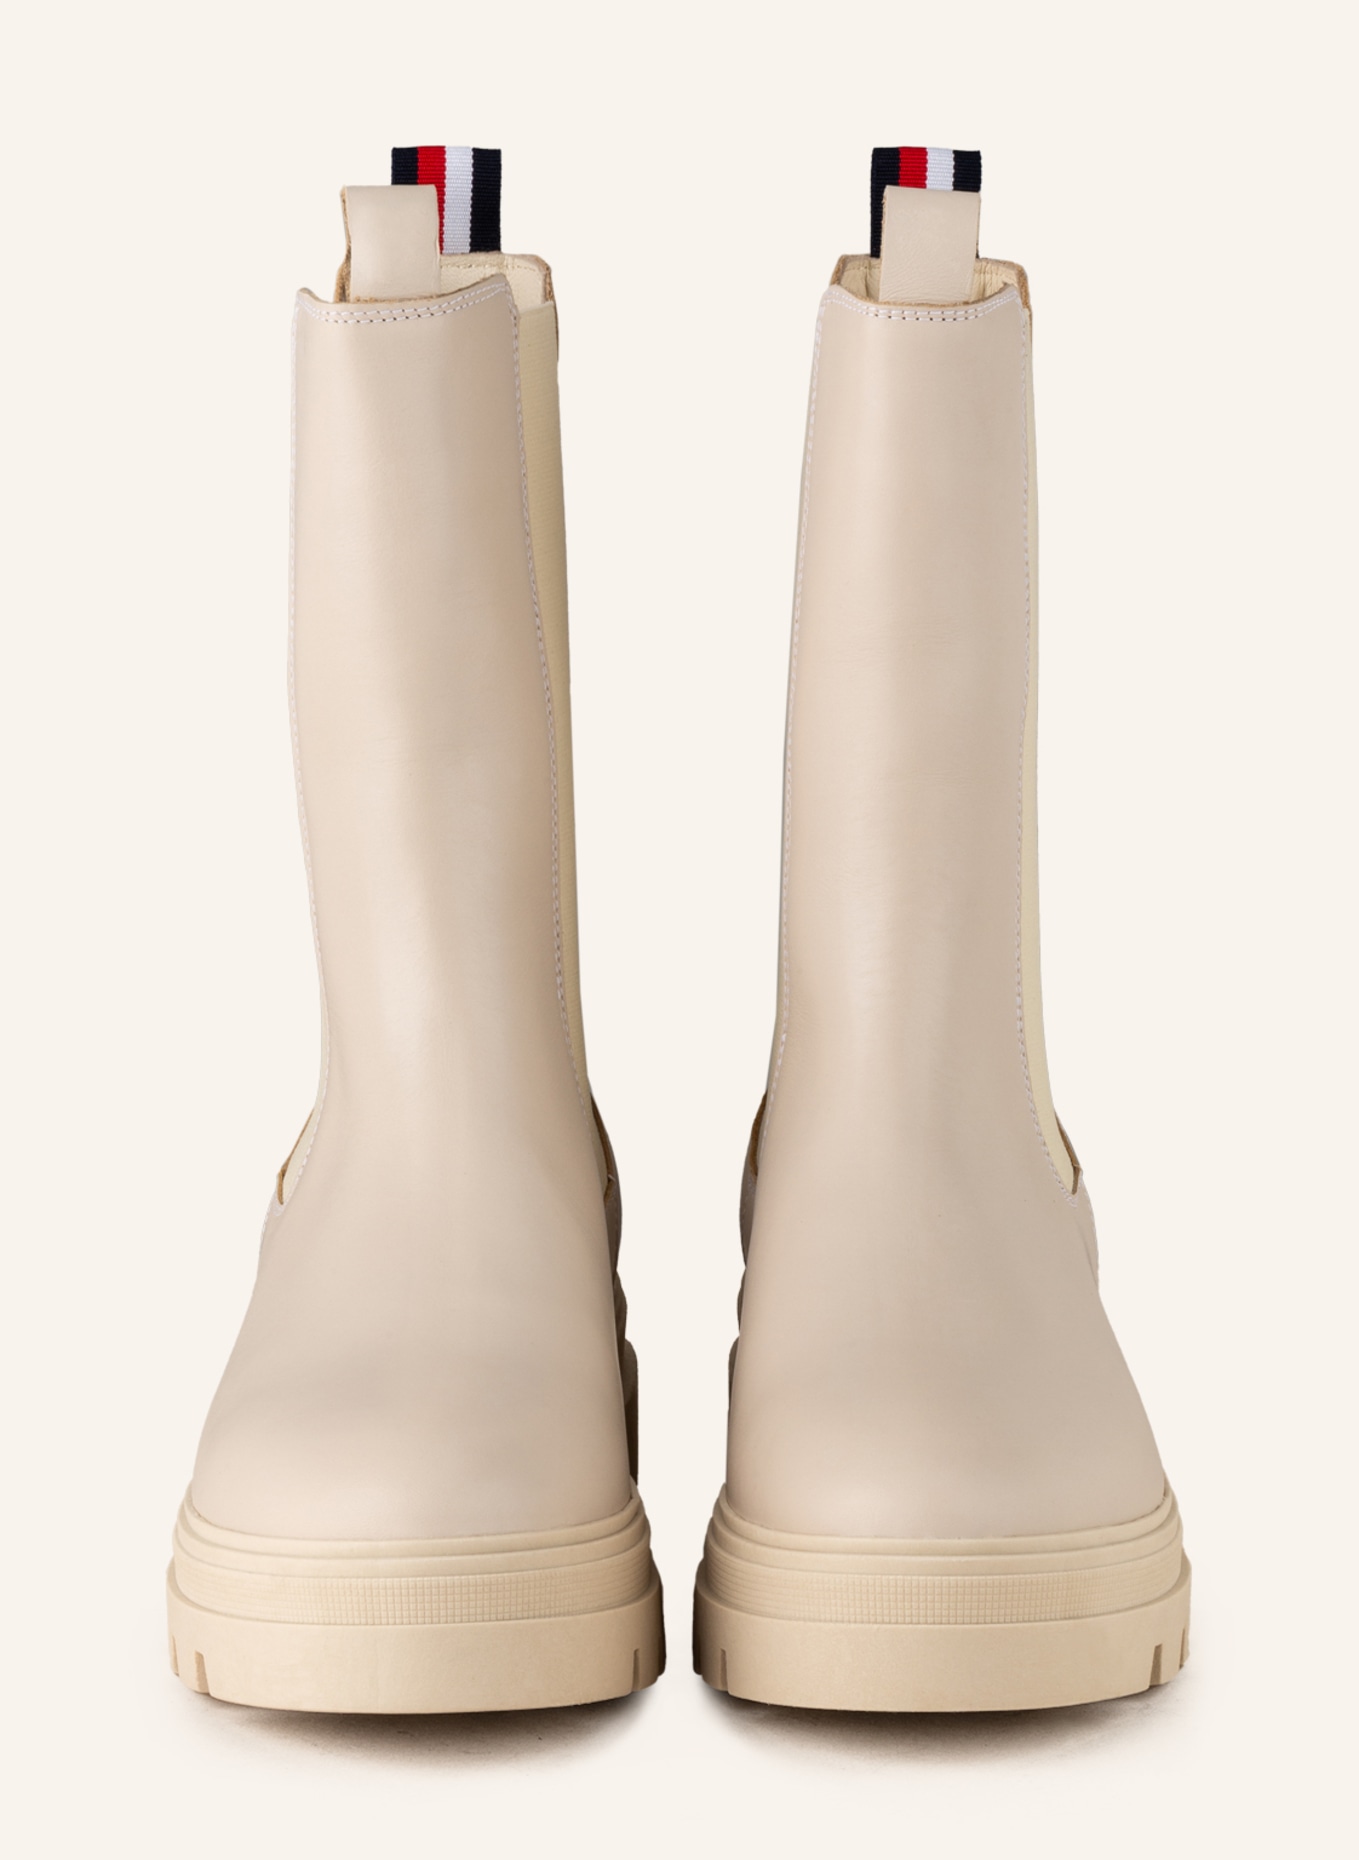 TOMMY HILFIGER Chelsea-Boots, Farbe: CREME (Bild 3)